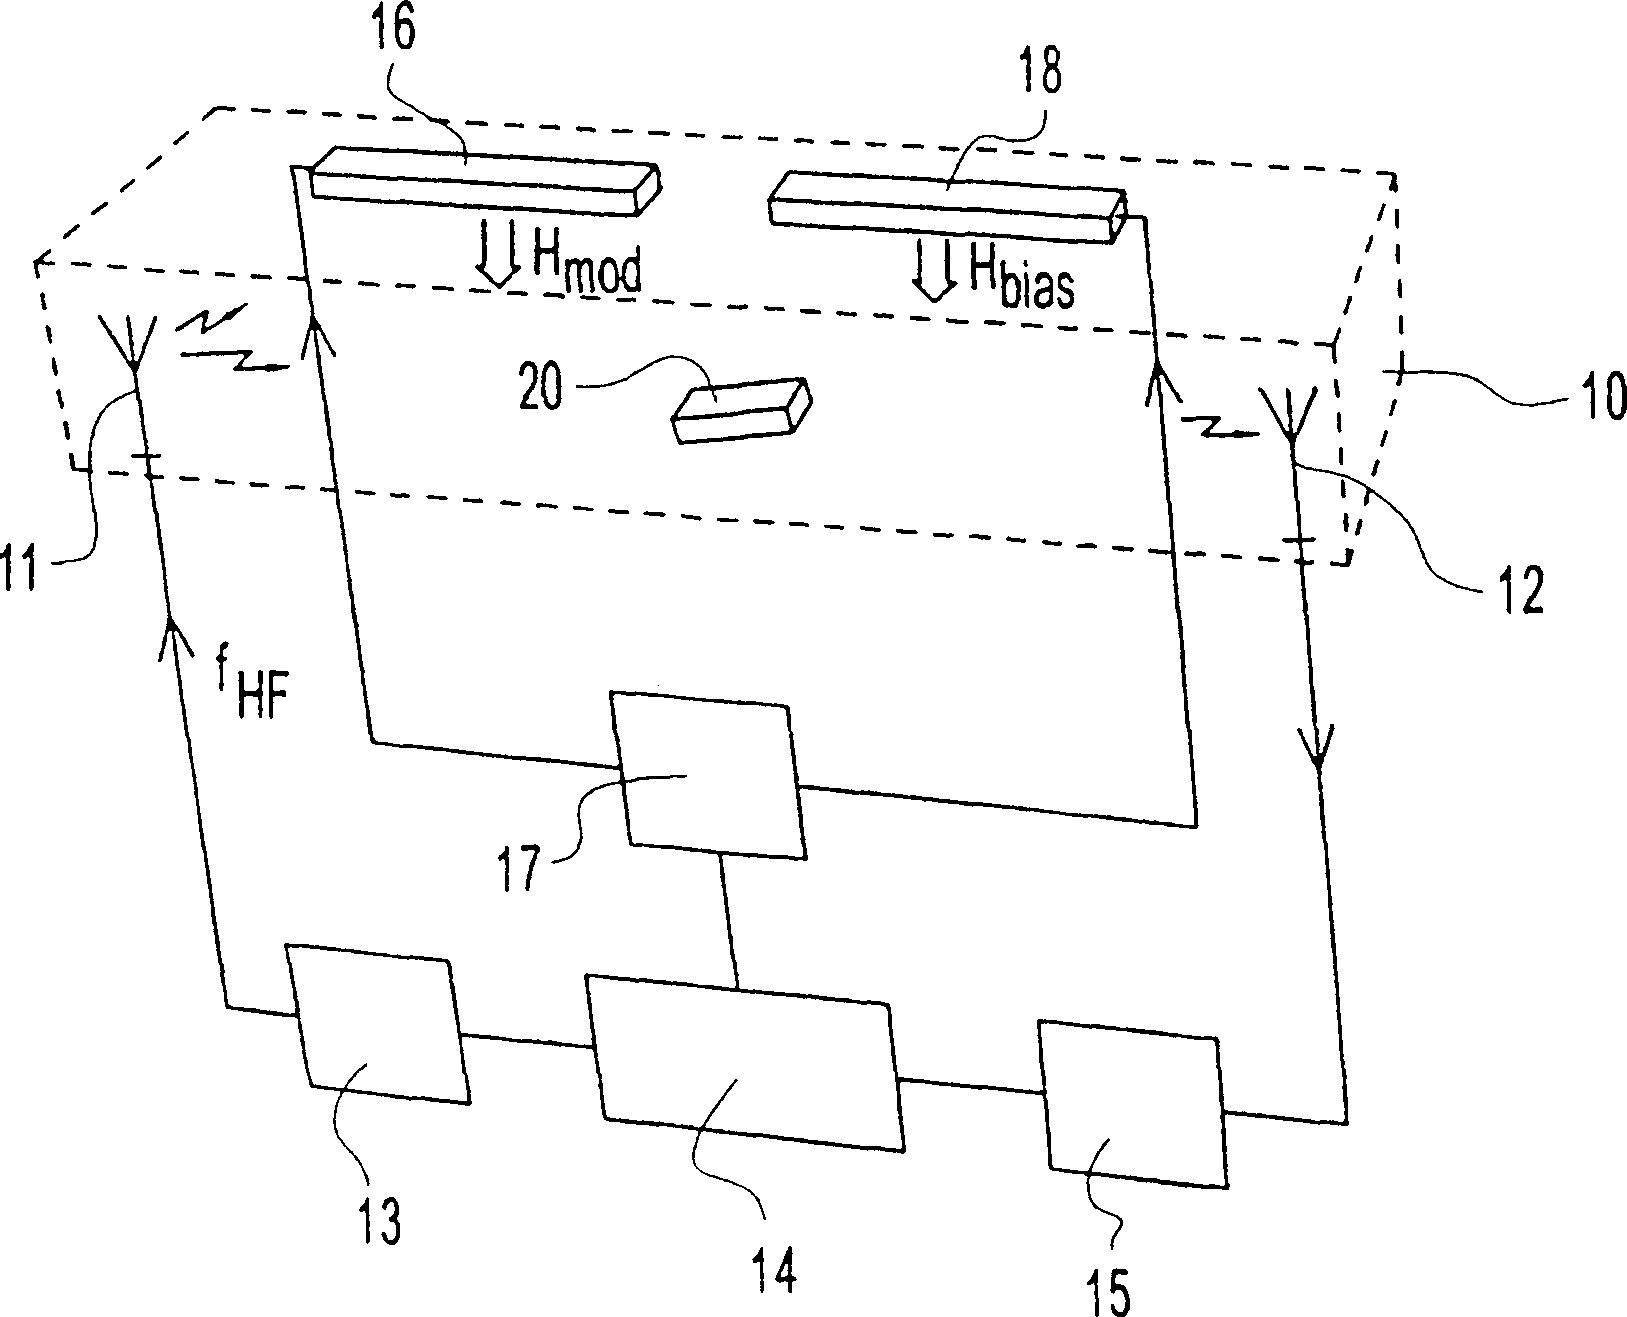 Sensor, method and system for remote detection of objects